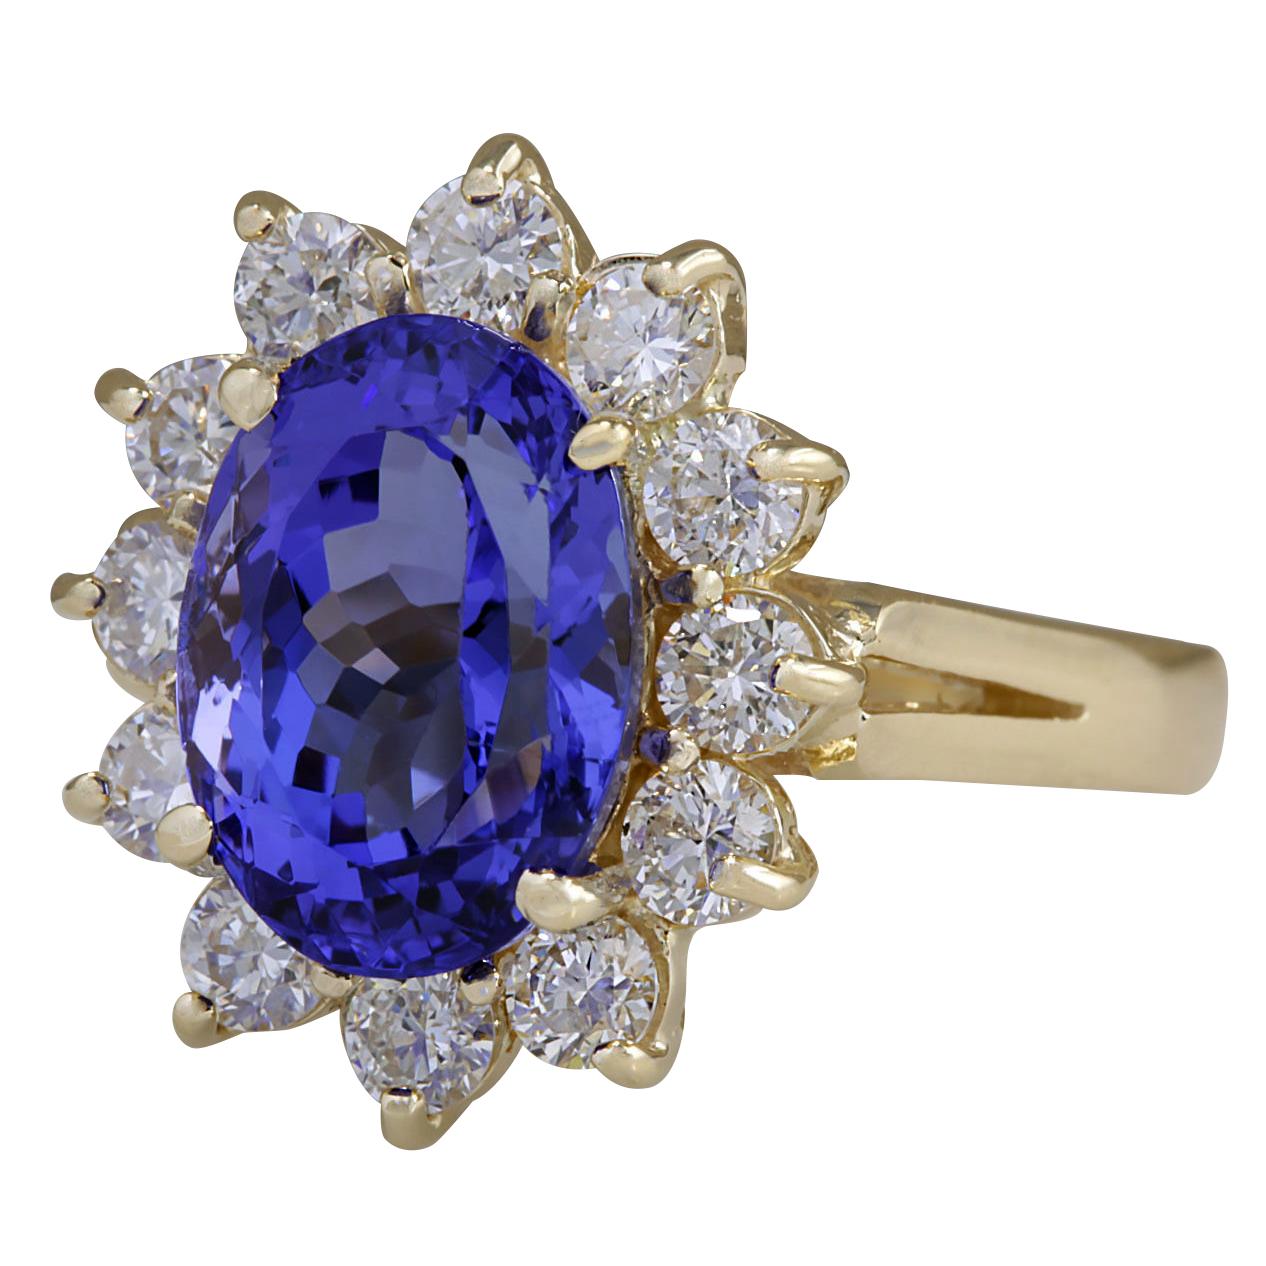 5.37 Carat Natural Tanzanite 14 Karat Yellow Gold Diamond Ring
Stamped: 14K Yellow Gold
Total Ring Weight: 4.5 Grams
Total Natural Tanzanite Weight is 4.42 Carat (Measures: 11.00x9.00 mm)
Color: Blue
Total Natural Diamond Weight is 0.95 Carat
Color: